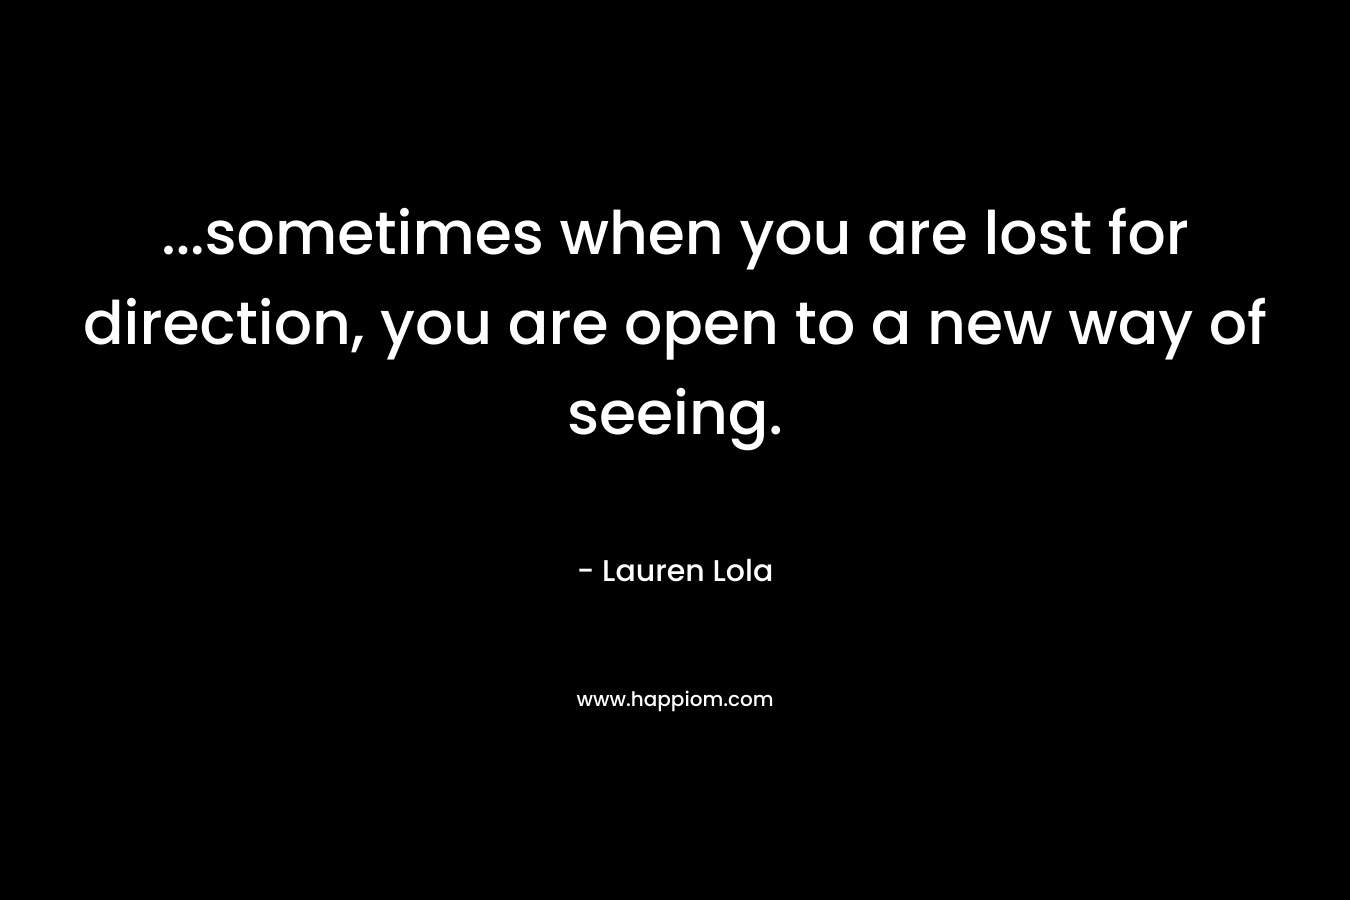 ...sometimes when you are lost for direction, you are open to a new way of seeing.